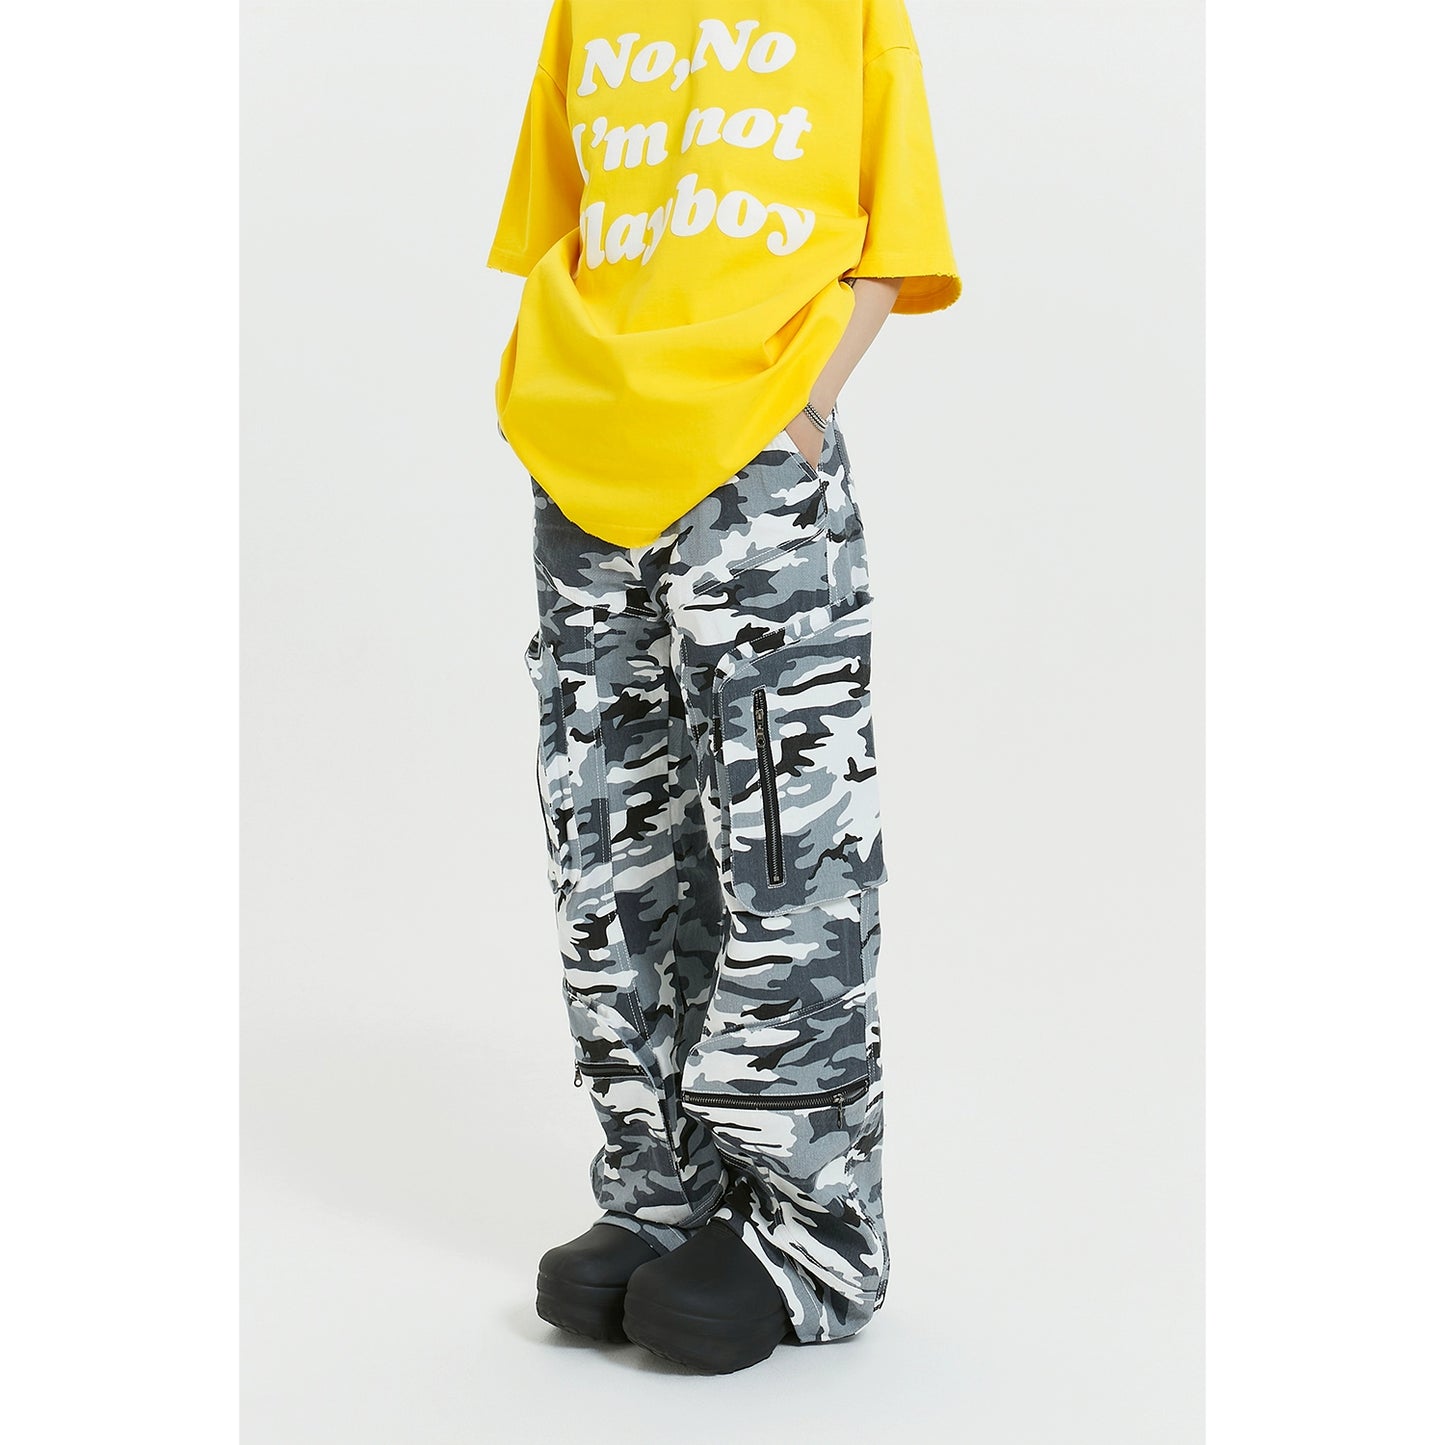 MICHINNYON American retro hiphop cargo camouflage function three-dimensional multi-pocket baggy trousers